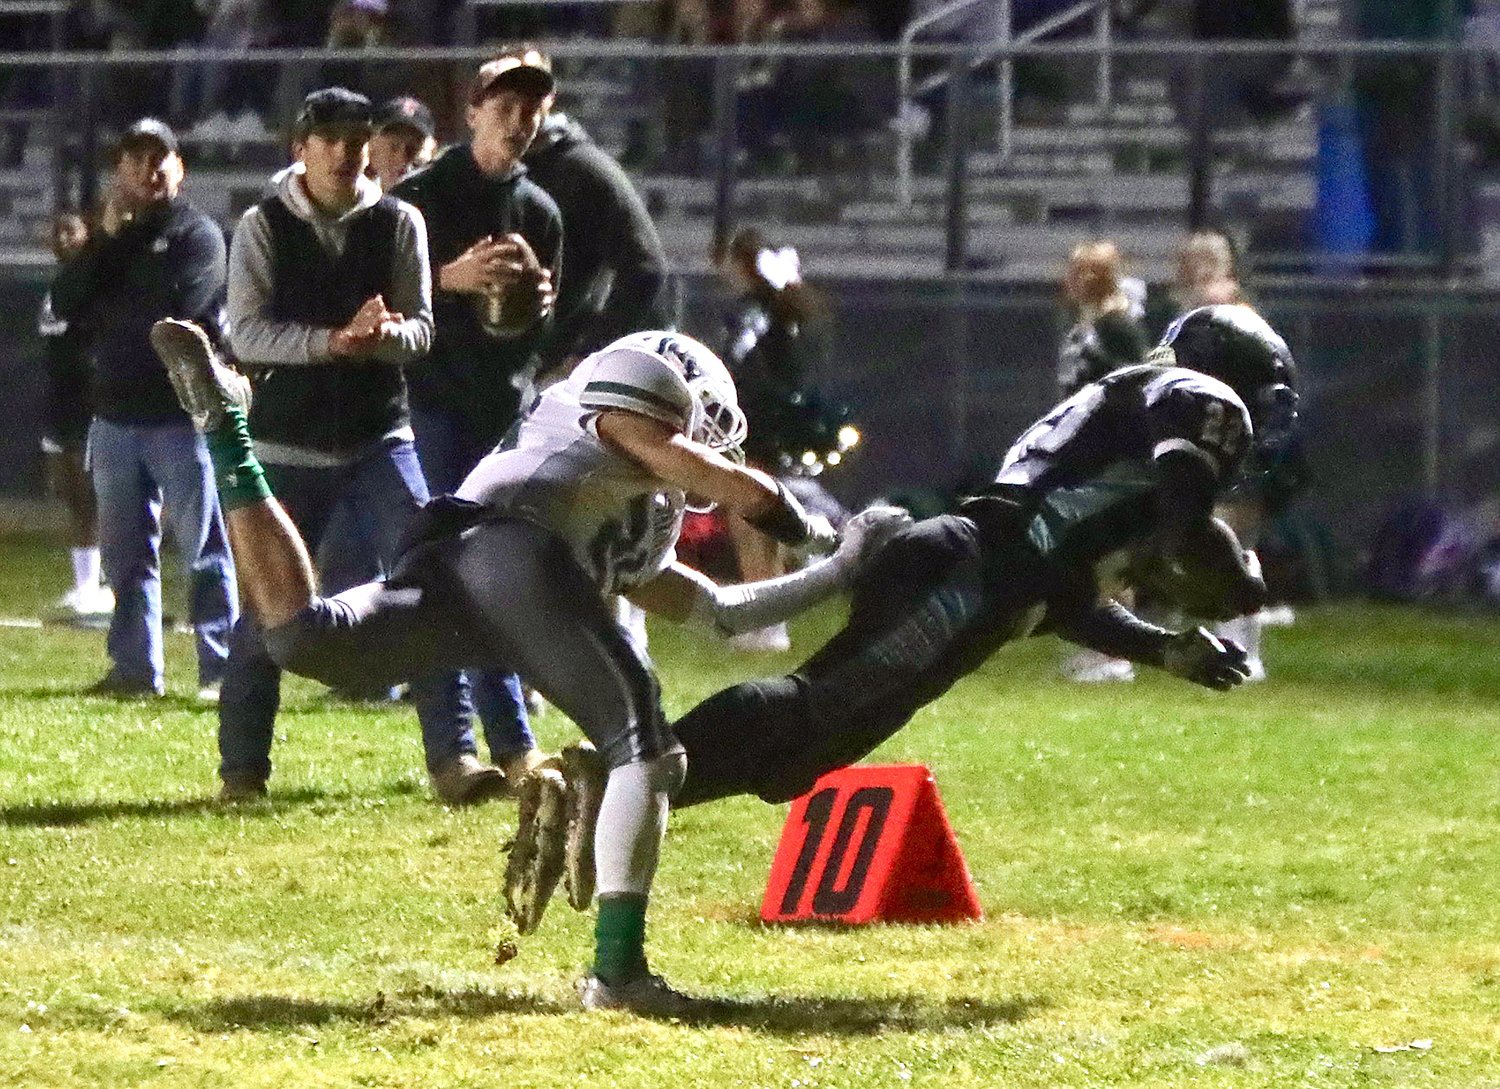 Sullivan West’s Jakob Halloran dives out of bounds after a great reception to avoid a tackle by Spackenkill defensive back Steven Ciancio. Halloran had a fine night receiving as well as on defense.